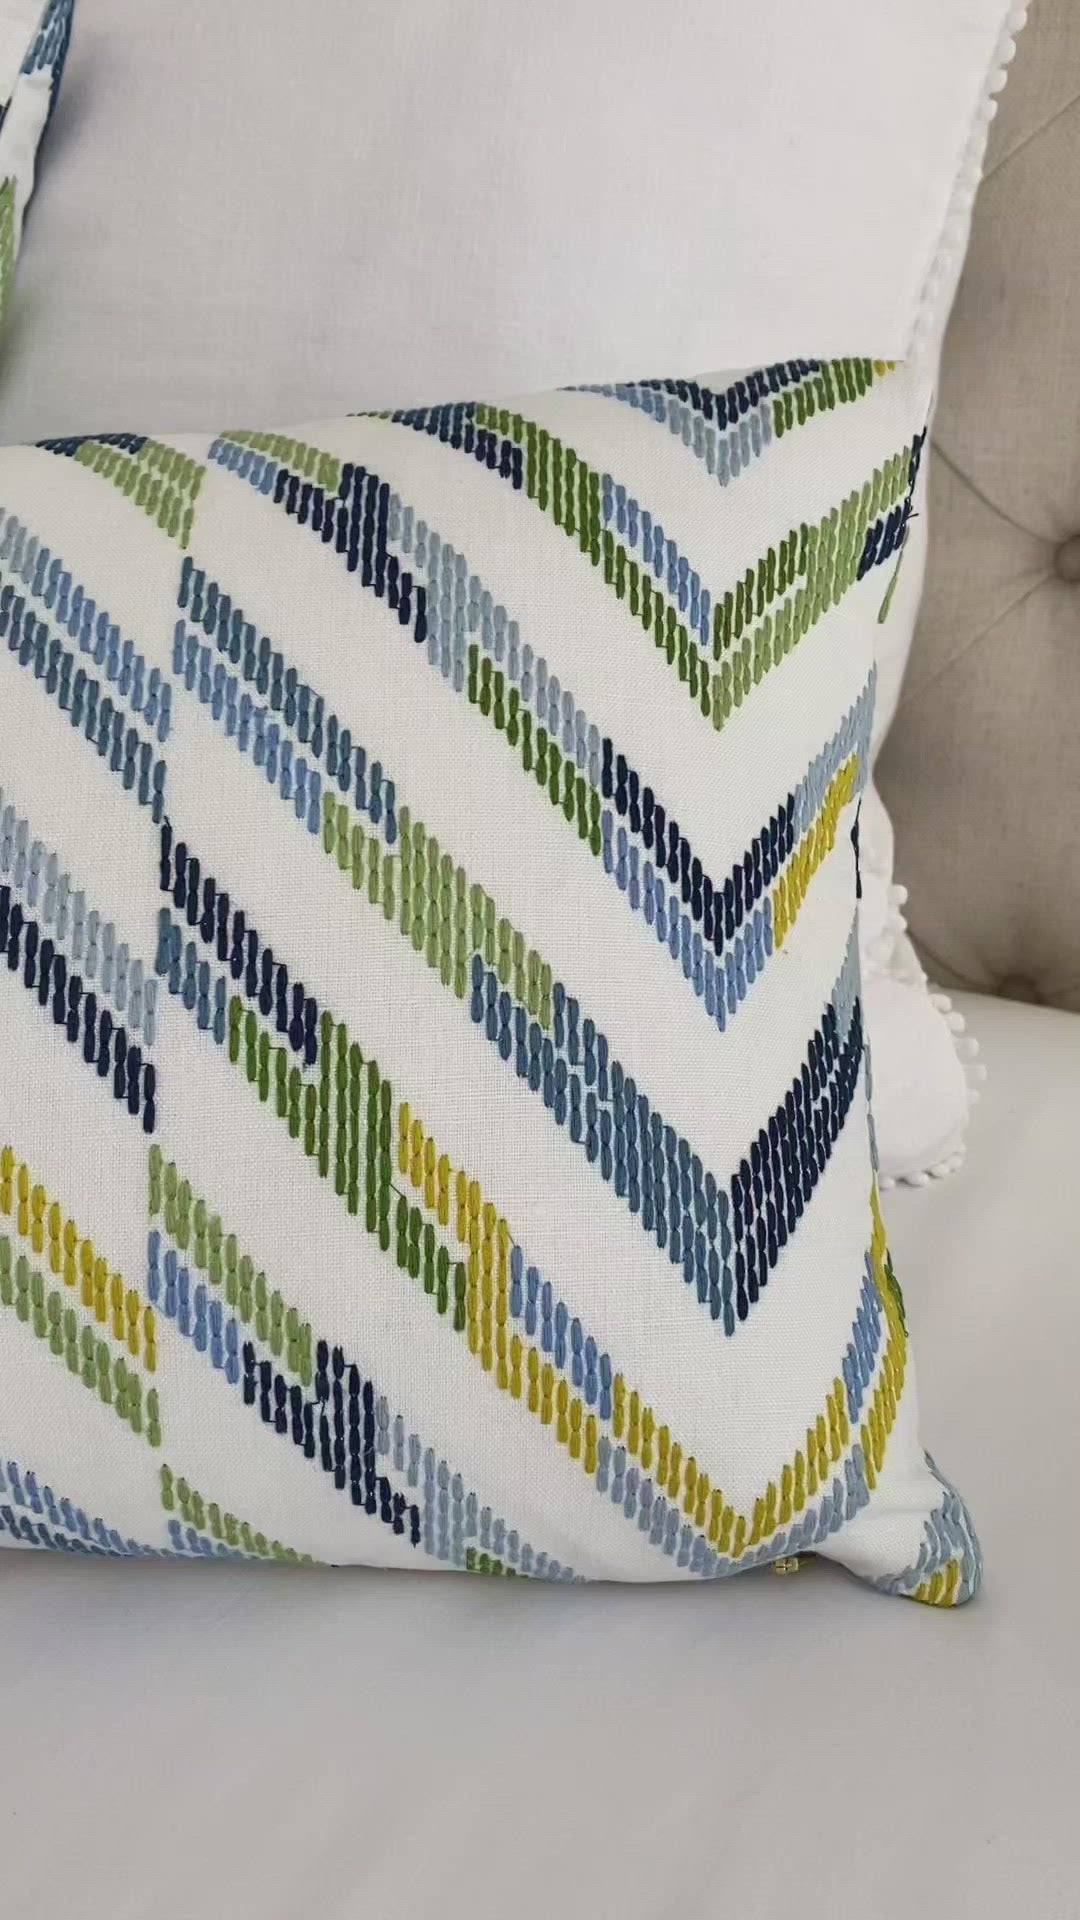 Thibaut Hamilton Textured Embroidery Geometric Blue and Yellow Designer Throw Pillow Cover Product Video